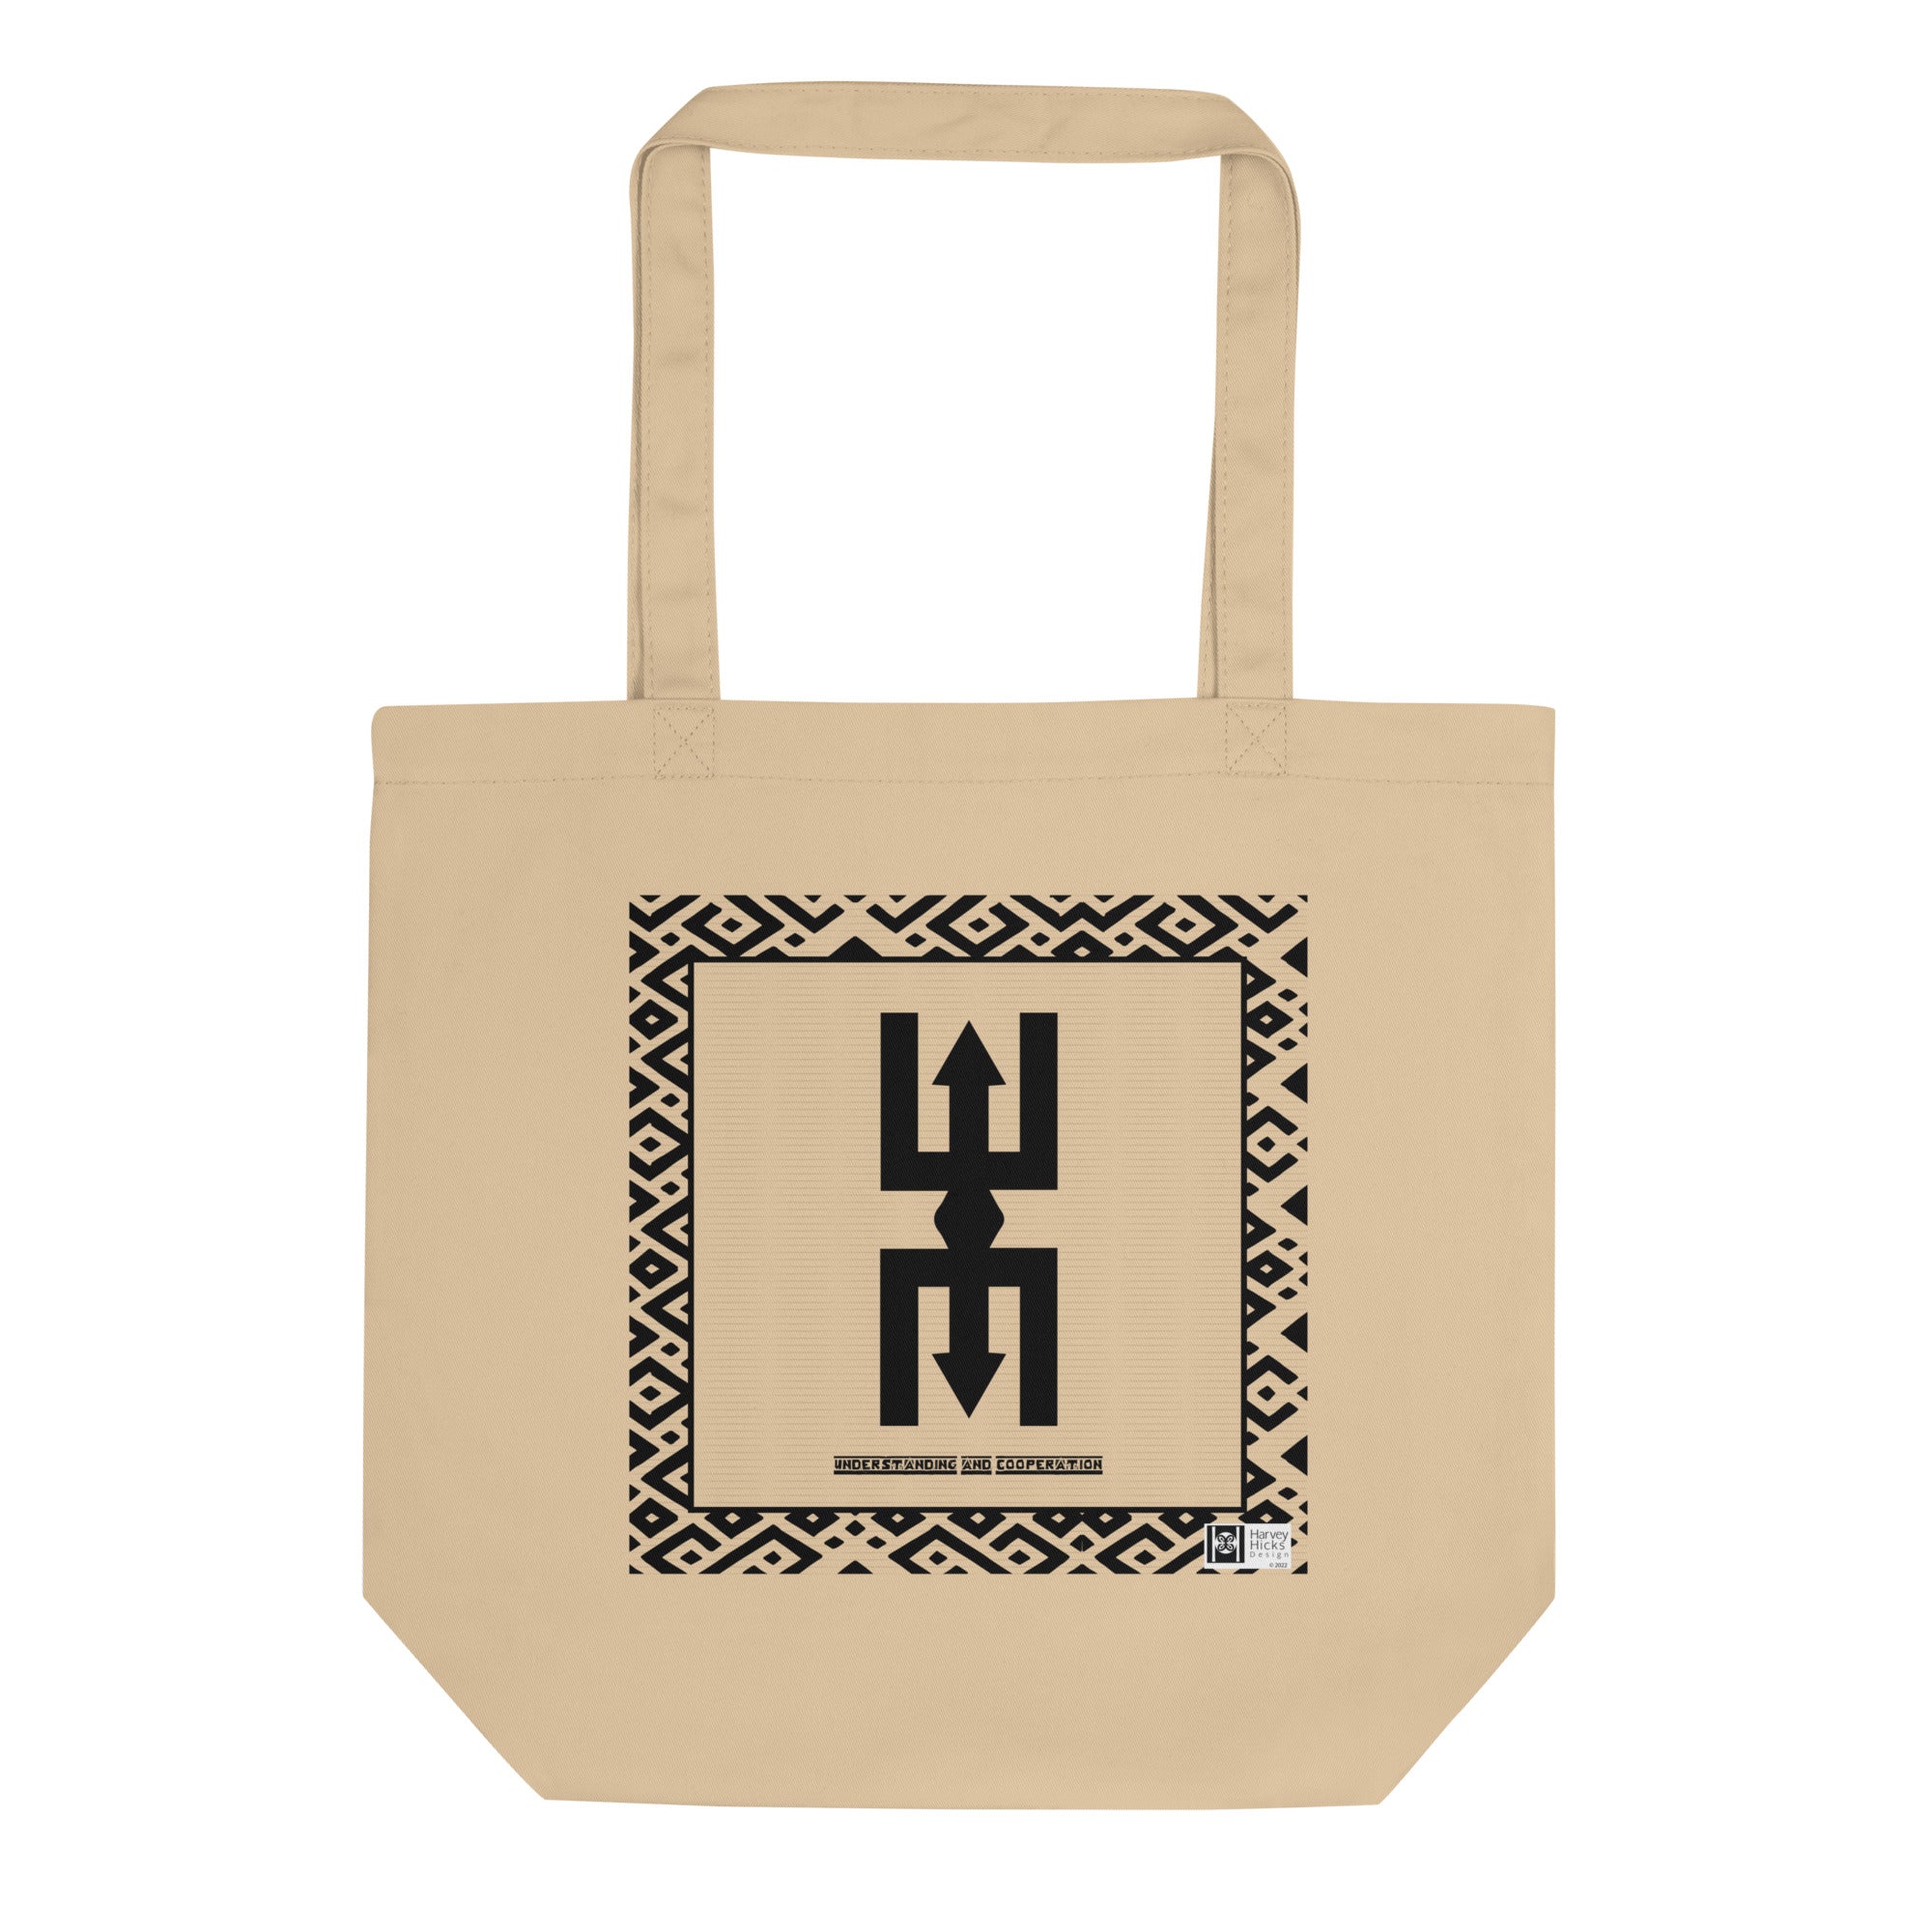 100% cotton Eco Tote Bag, featuring the Adinkra symbol for cooperation